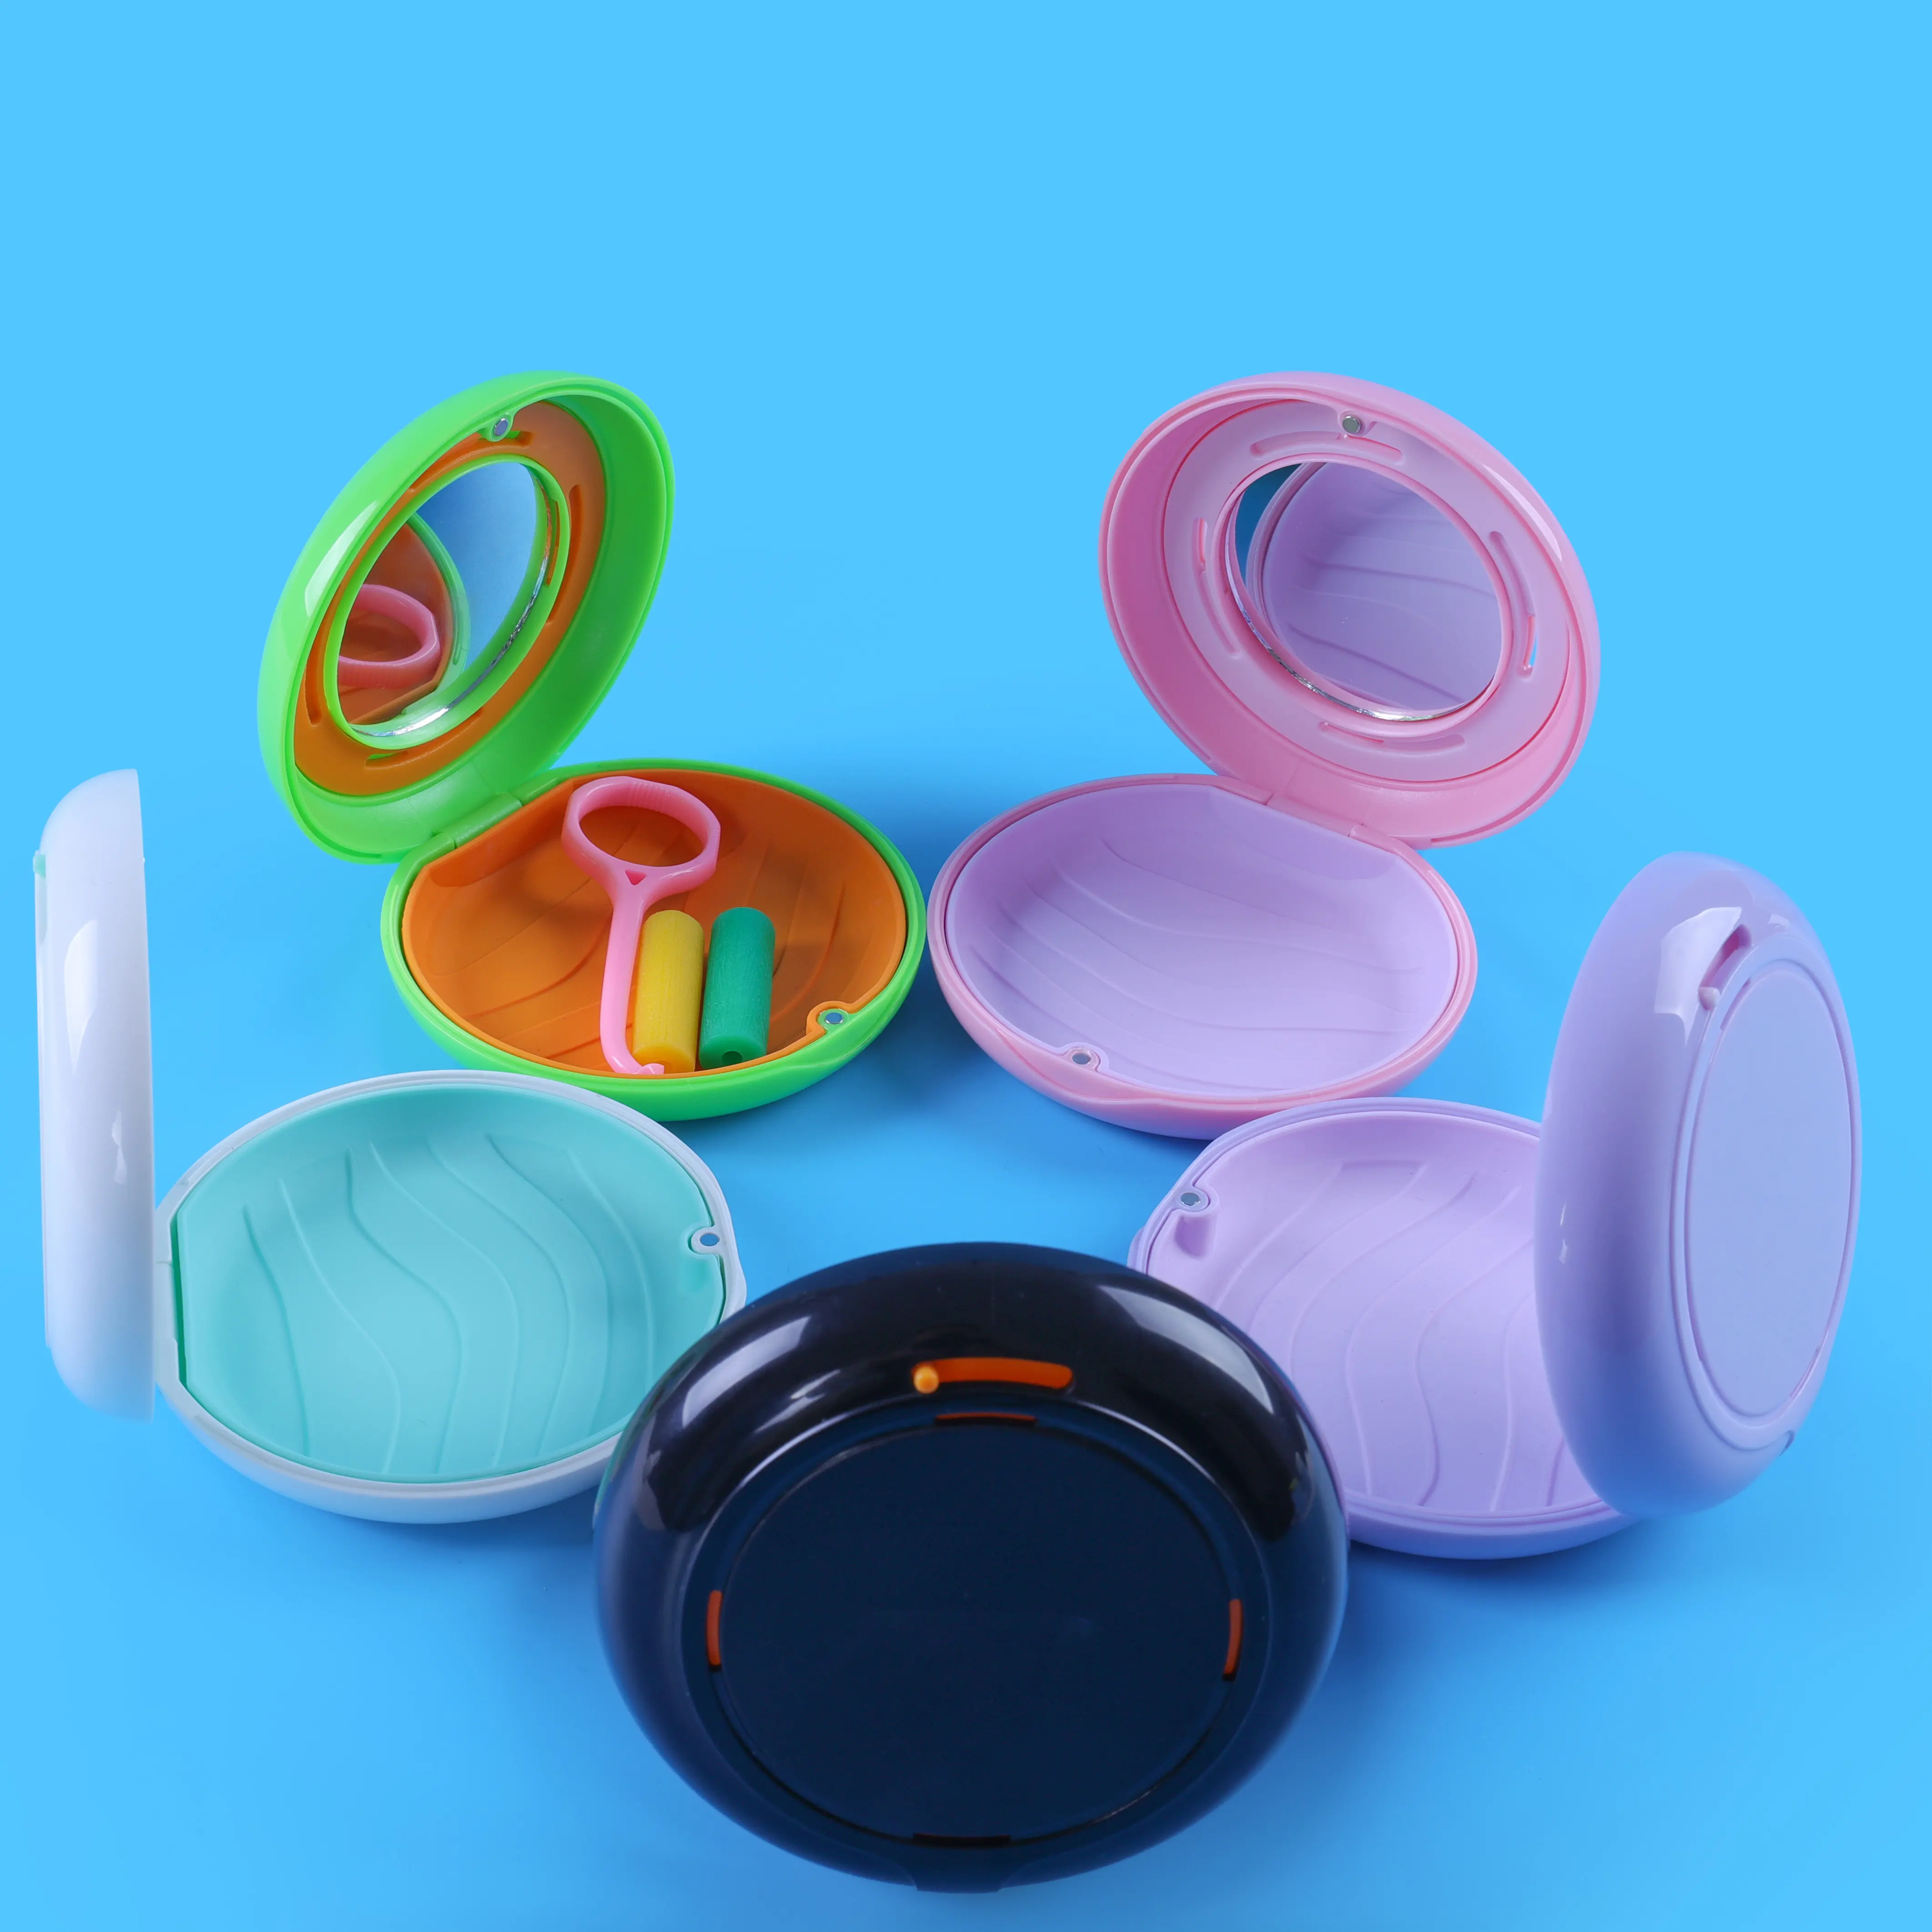 Dental Retainer Case With Aligner Remover Tool Orthodontic Mouth Guard Oral Hygiene Supplies Storage Box Plastic Container New